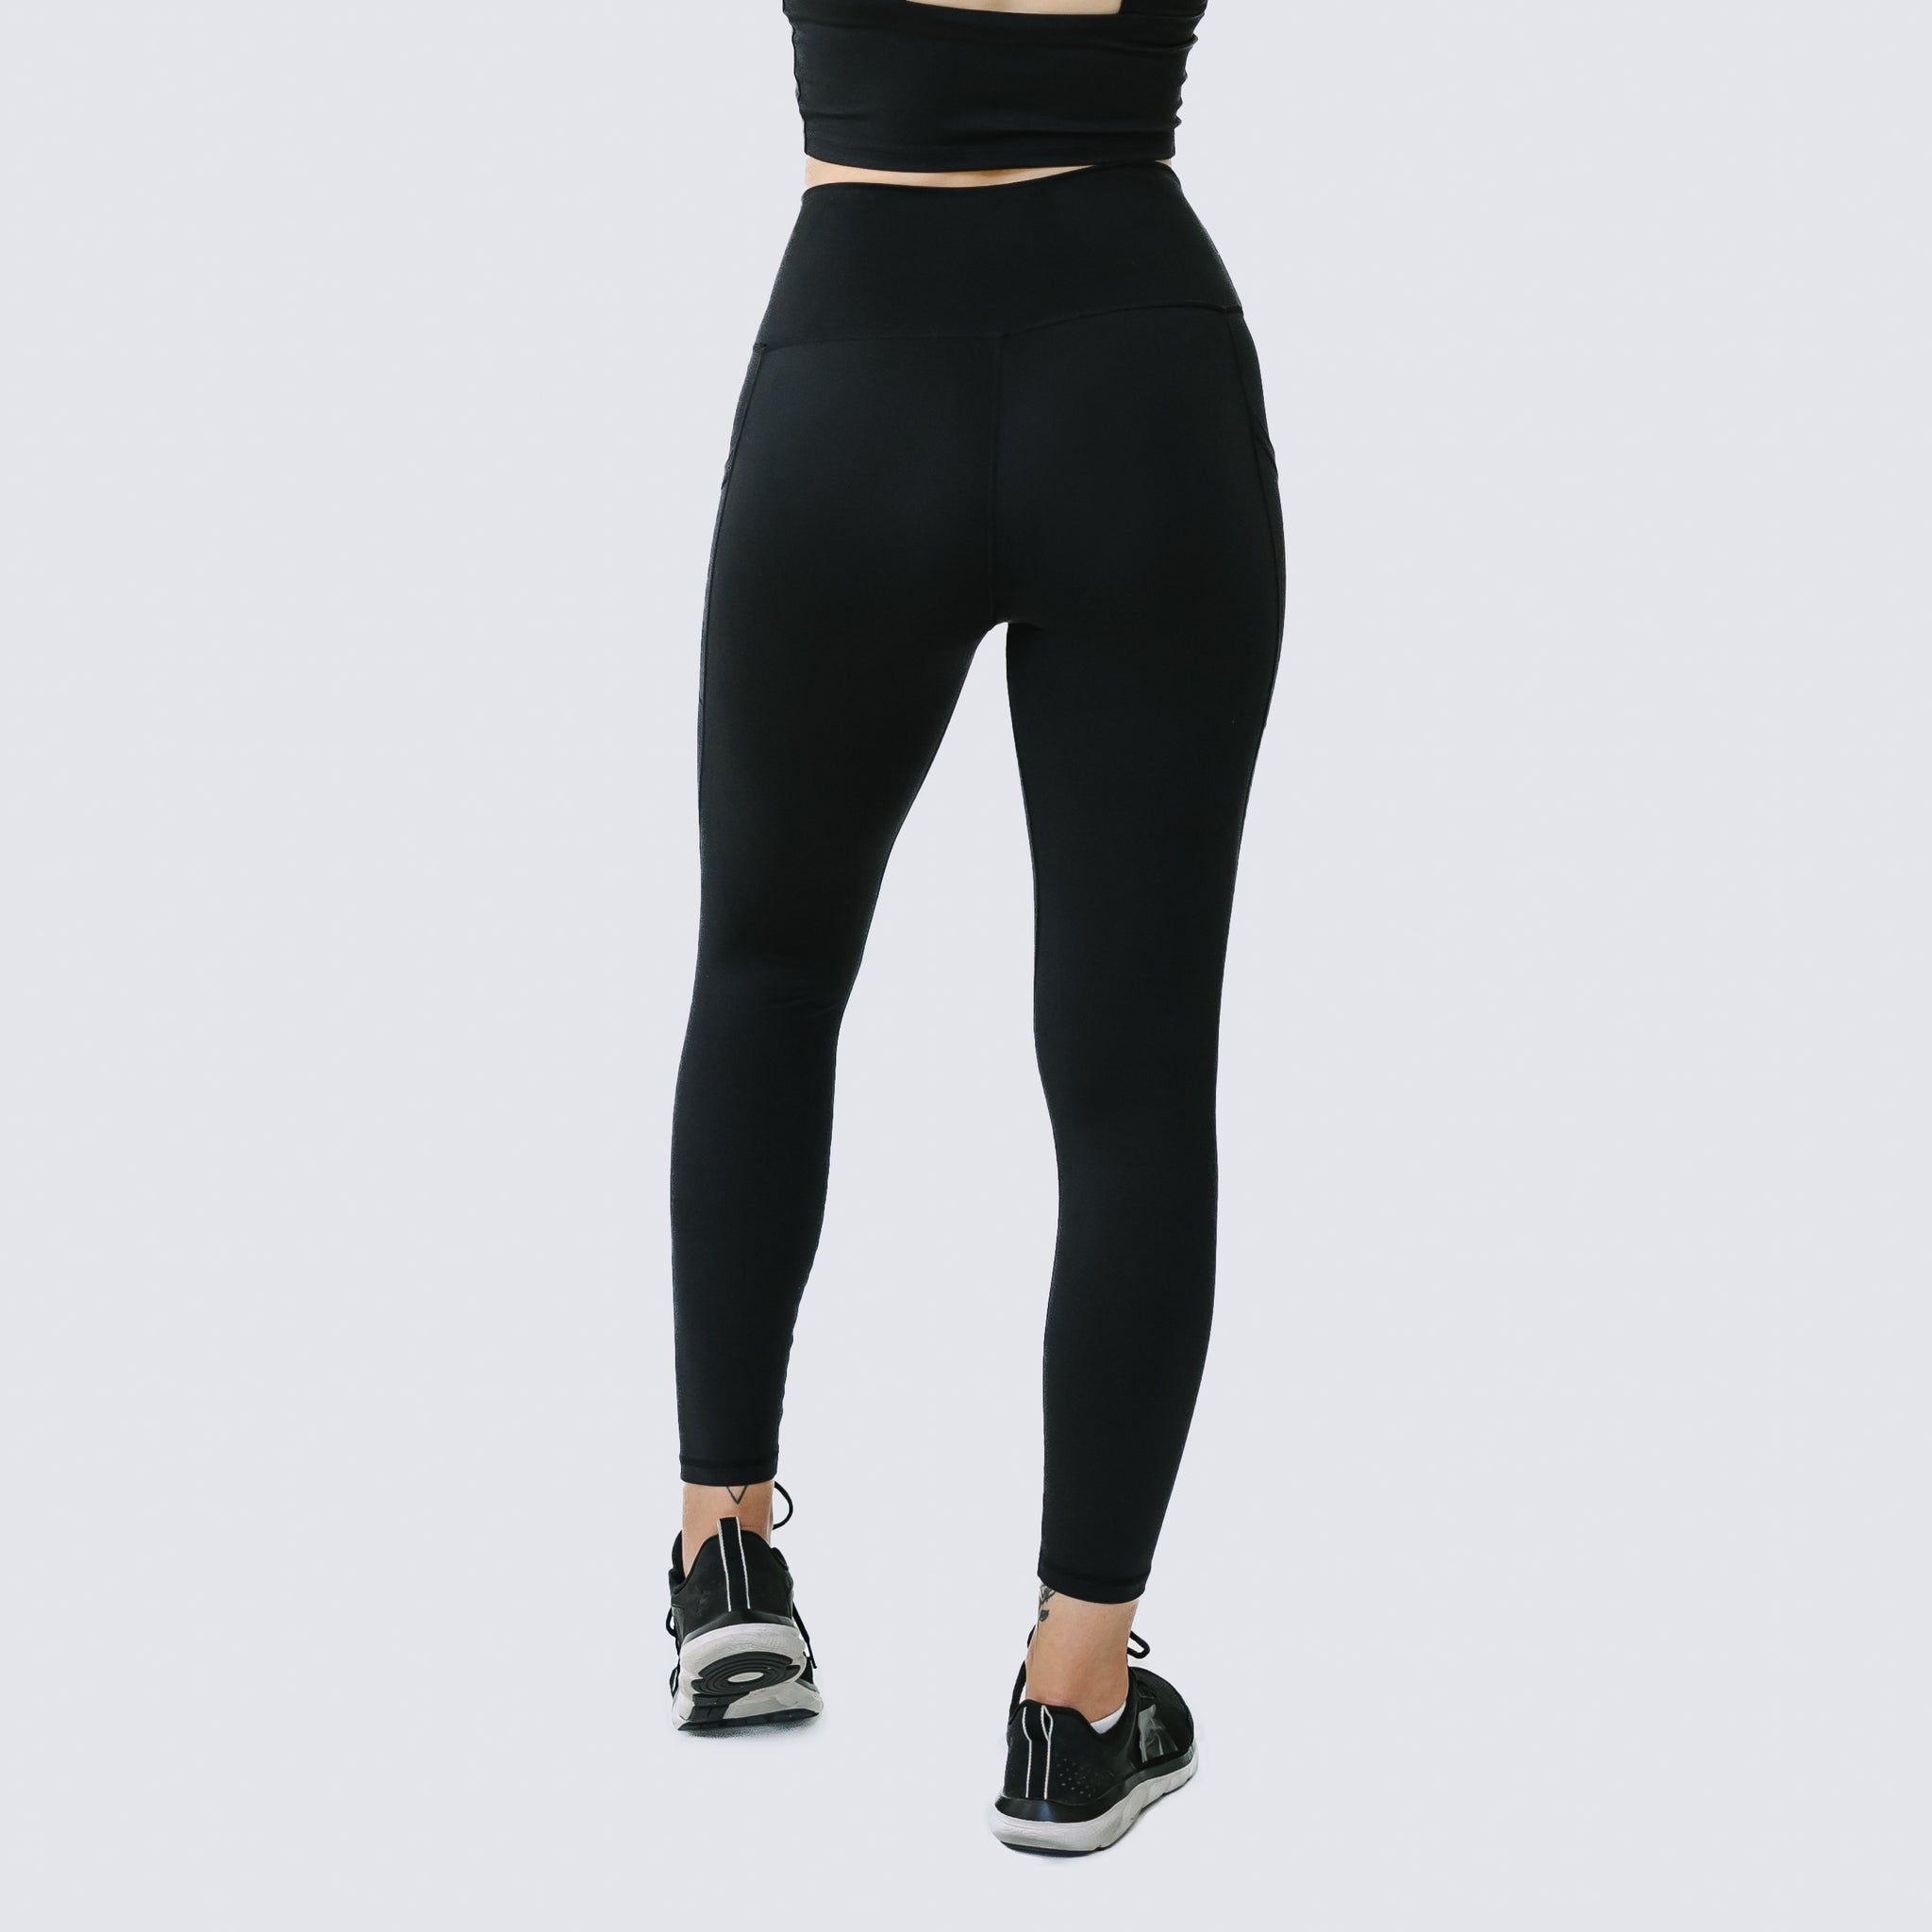 SoftLuxe Stay Put Leggings - Love – Solid and Fit Black